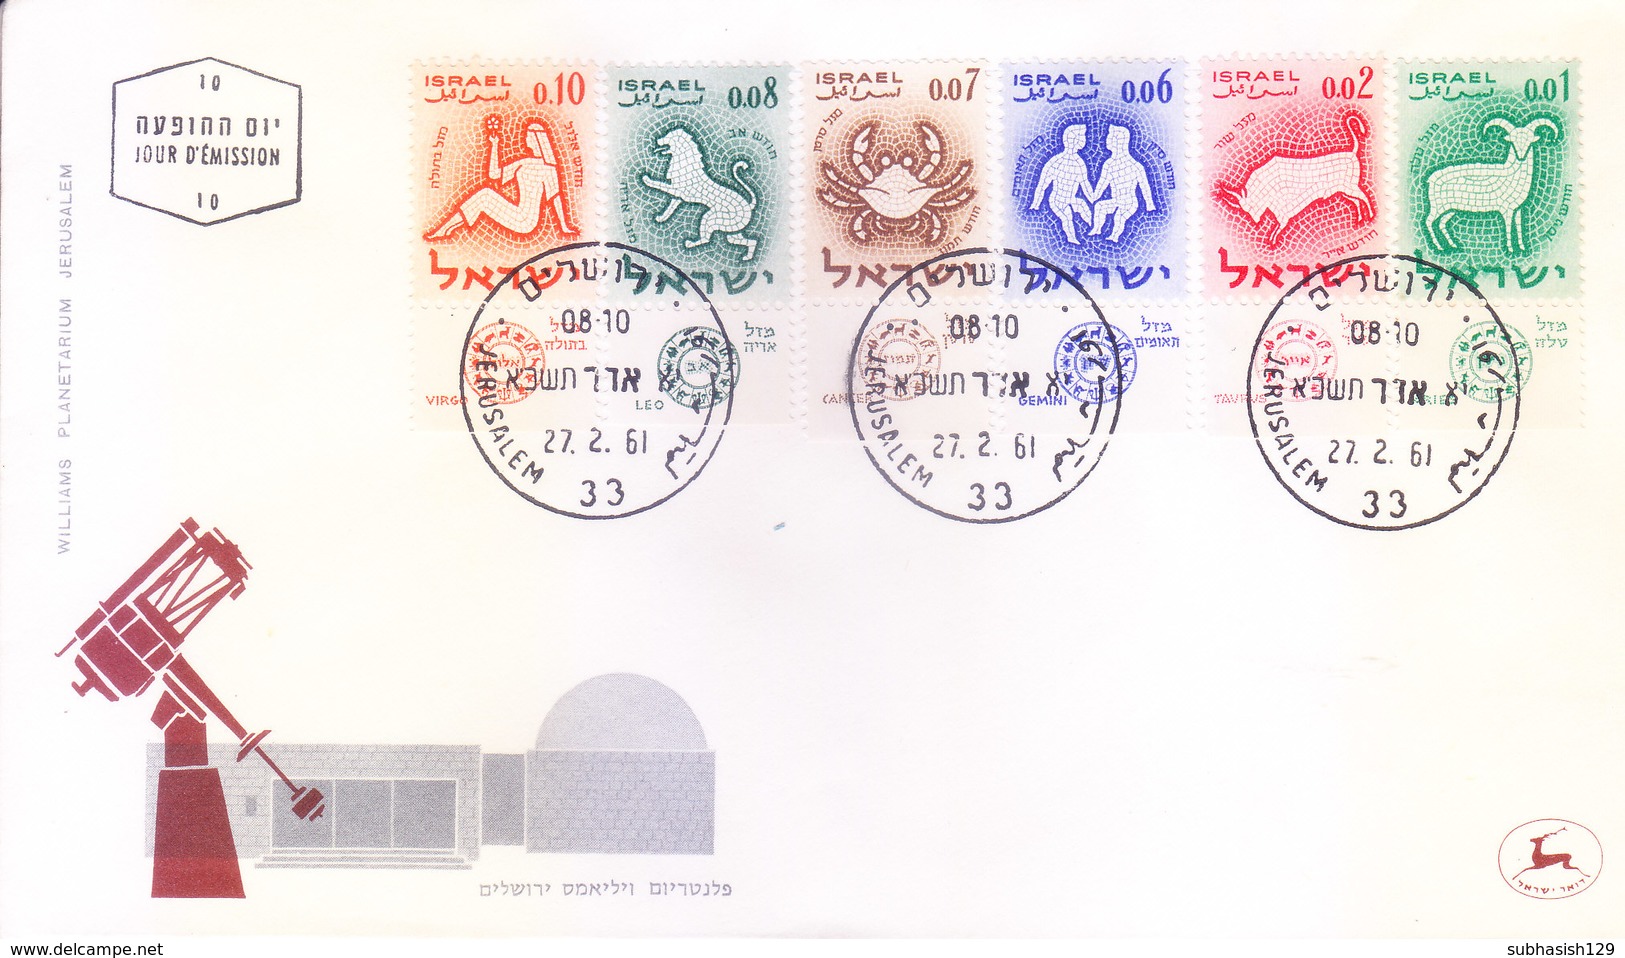 ISRAEL : FIRST DAY COVER : 27-02-1961 : ISSUED FROM JERUSALEM : WILLIAM PLANETARIUM : USE OF TAB STAMPS : 6v COMPLETE - Brieven En Documenten